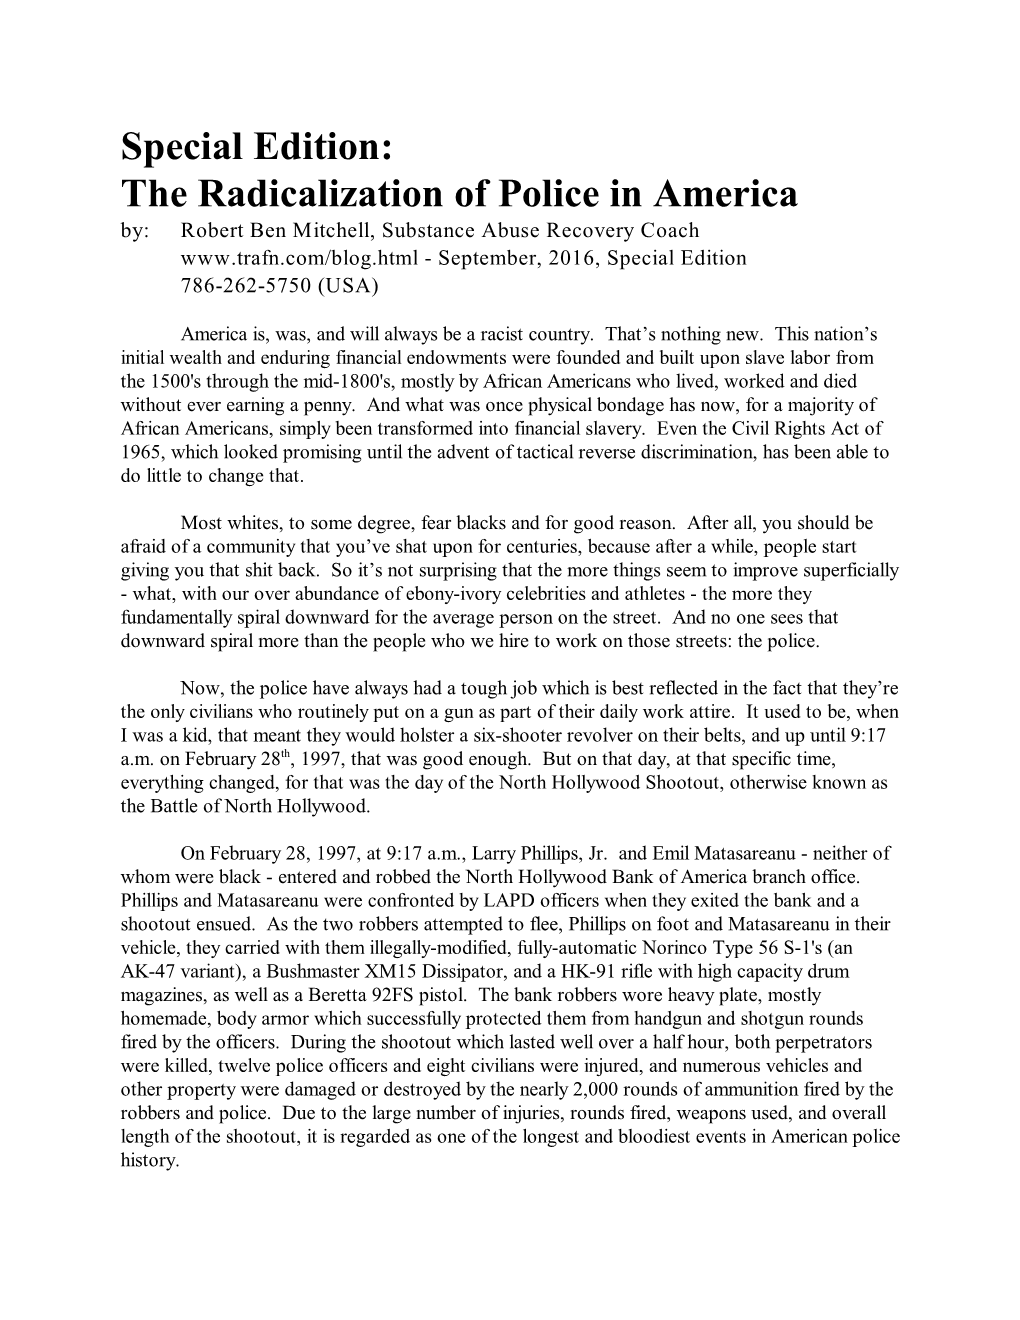 Special Edition: the Radicalization of Police in America